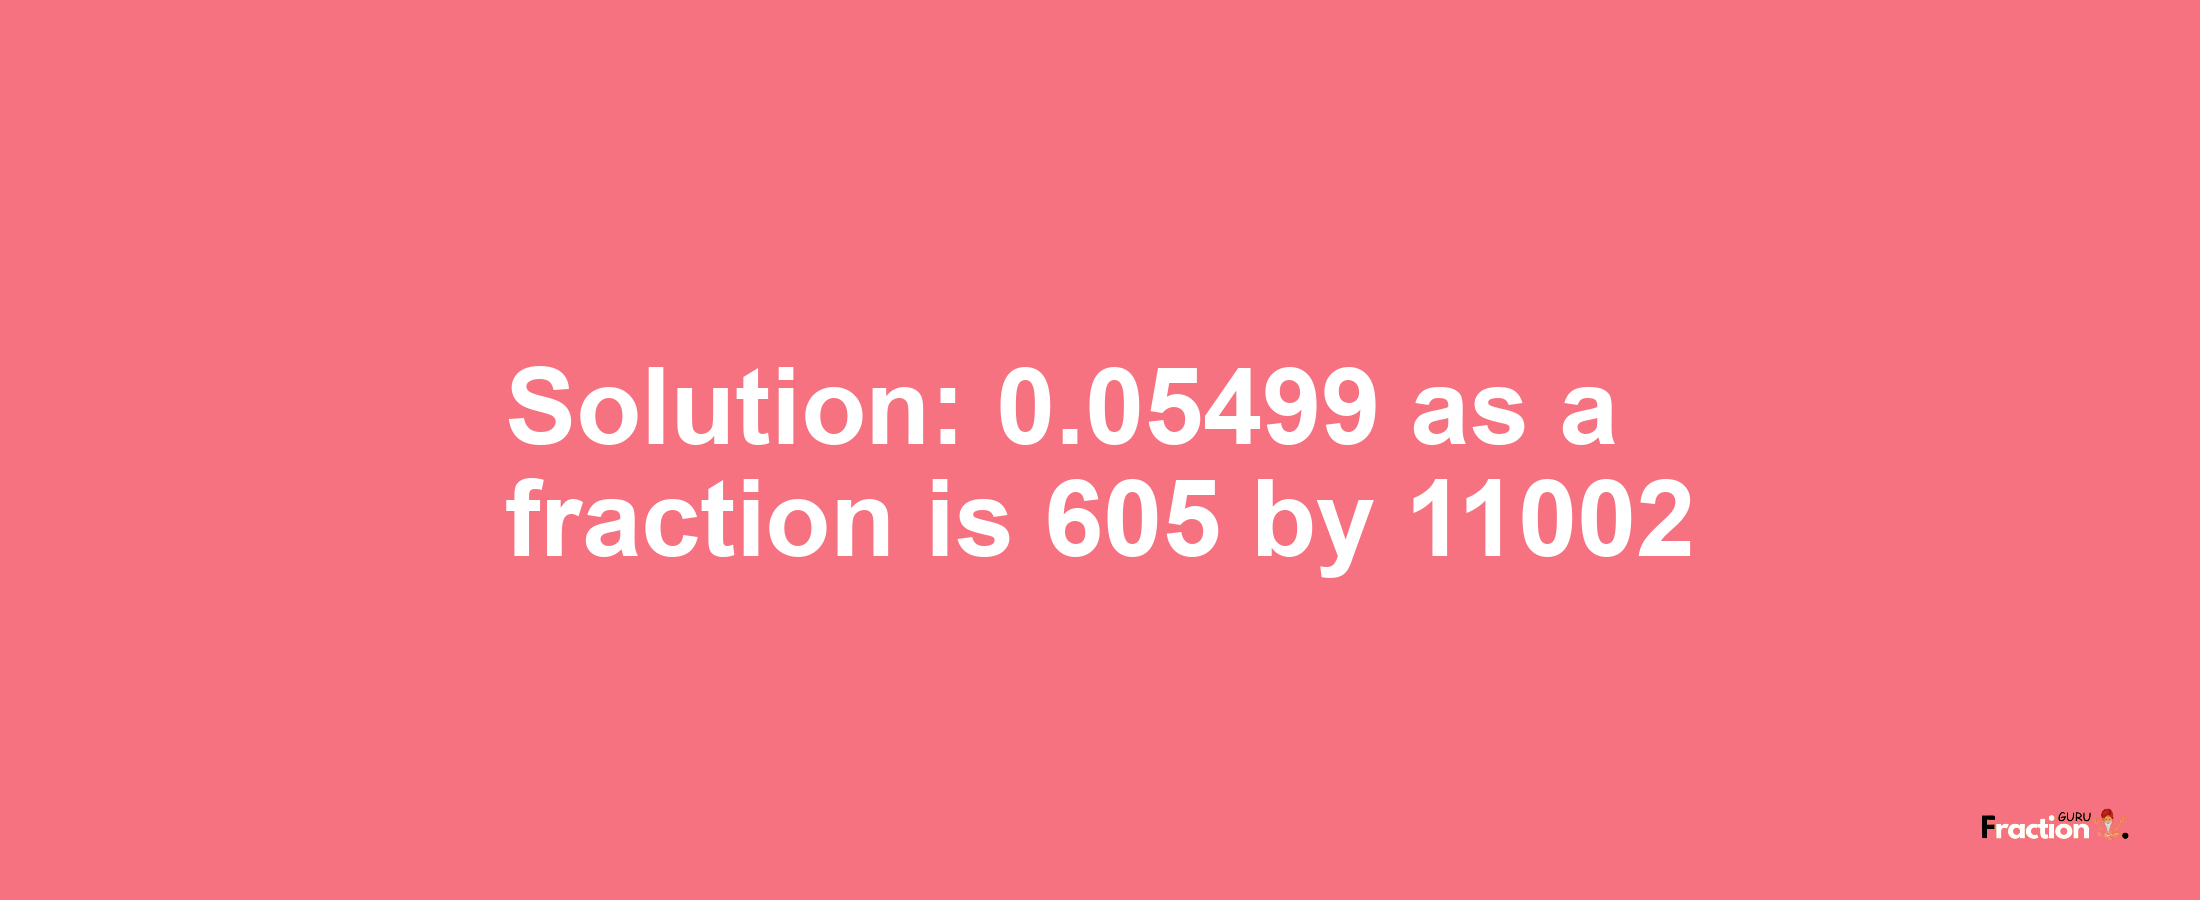 Solution:0.05499 as a fraction is 605/11002